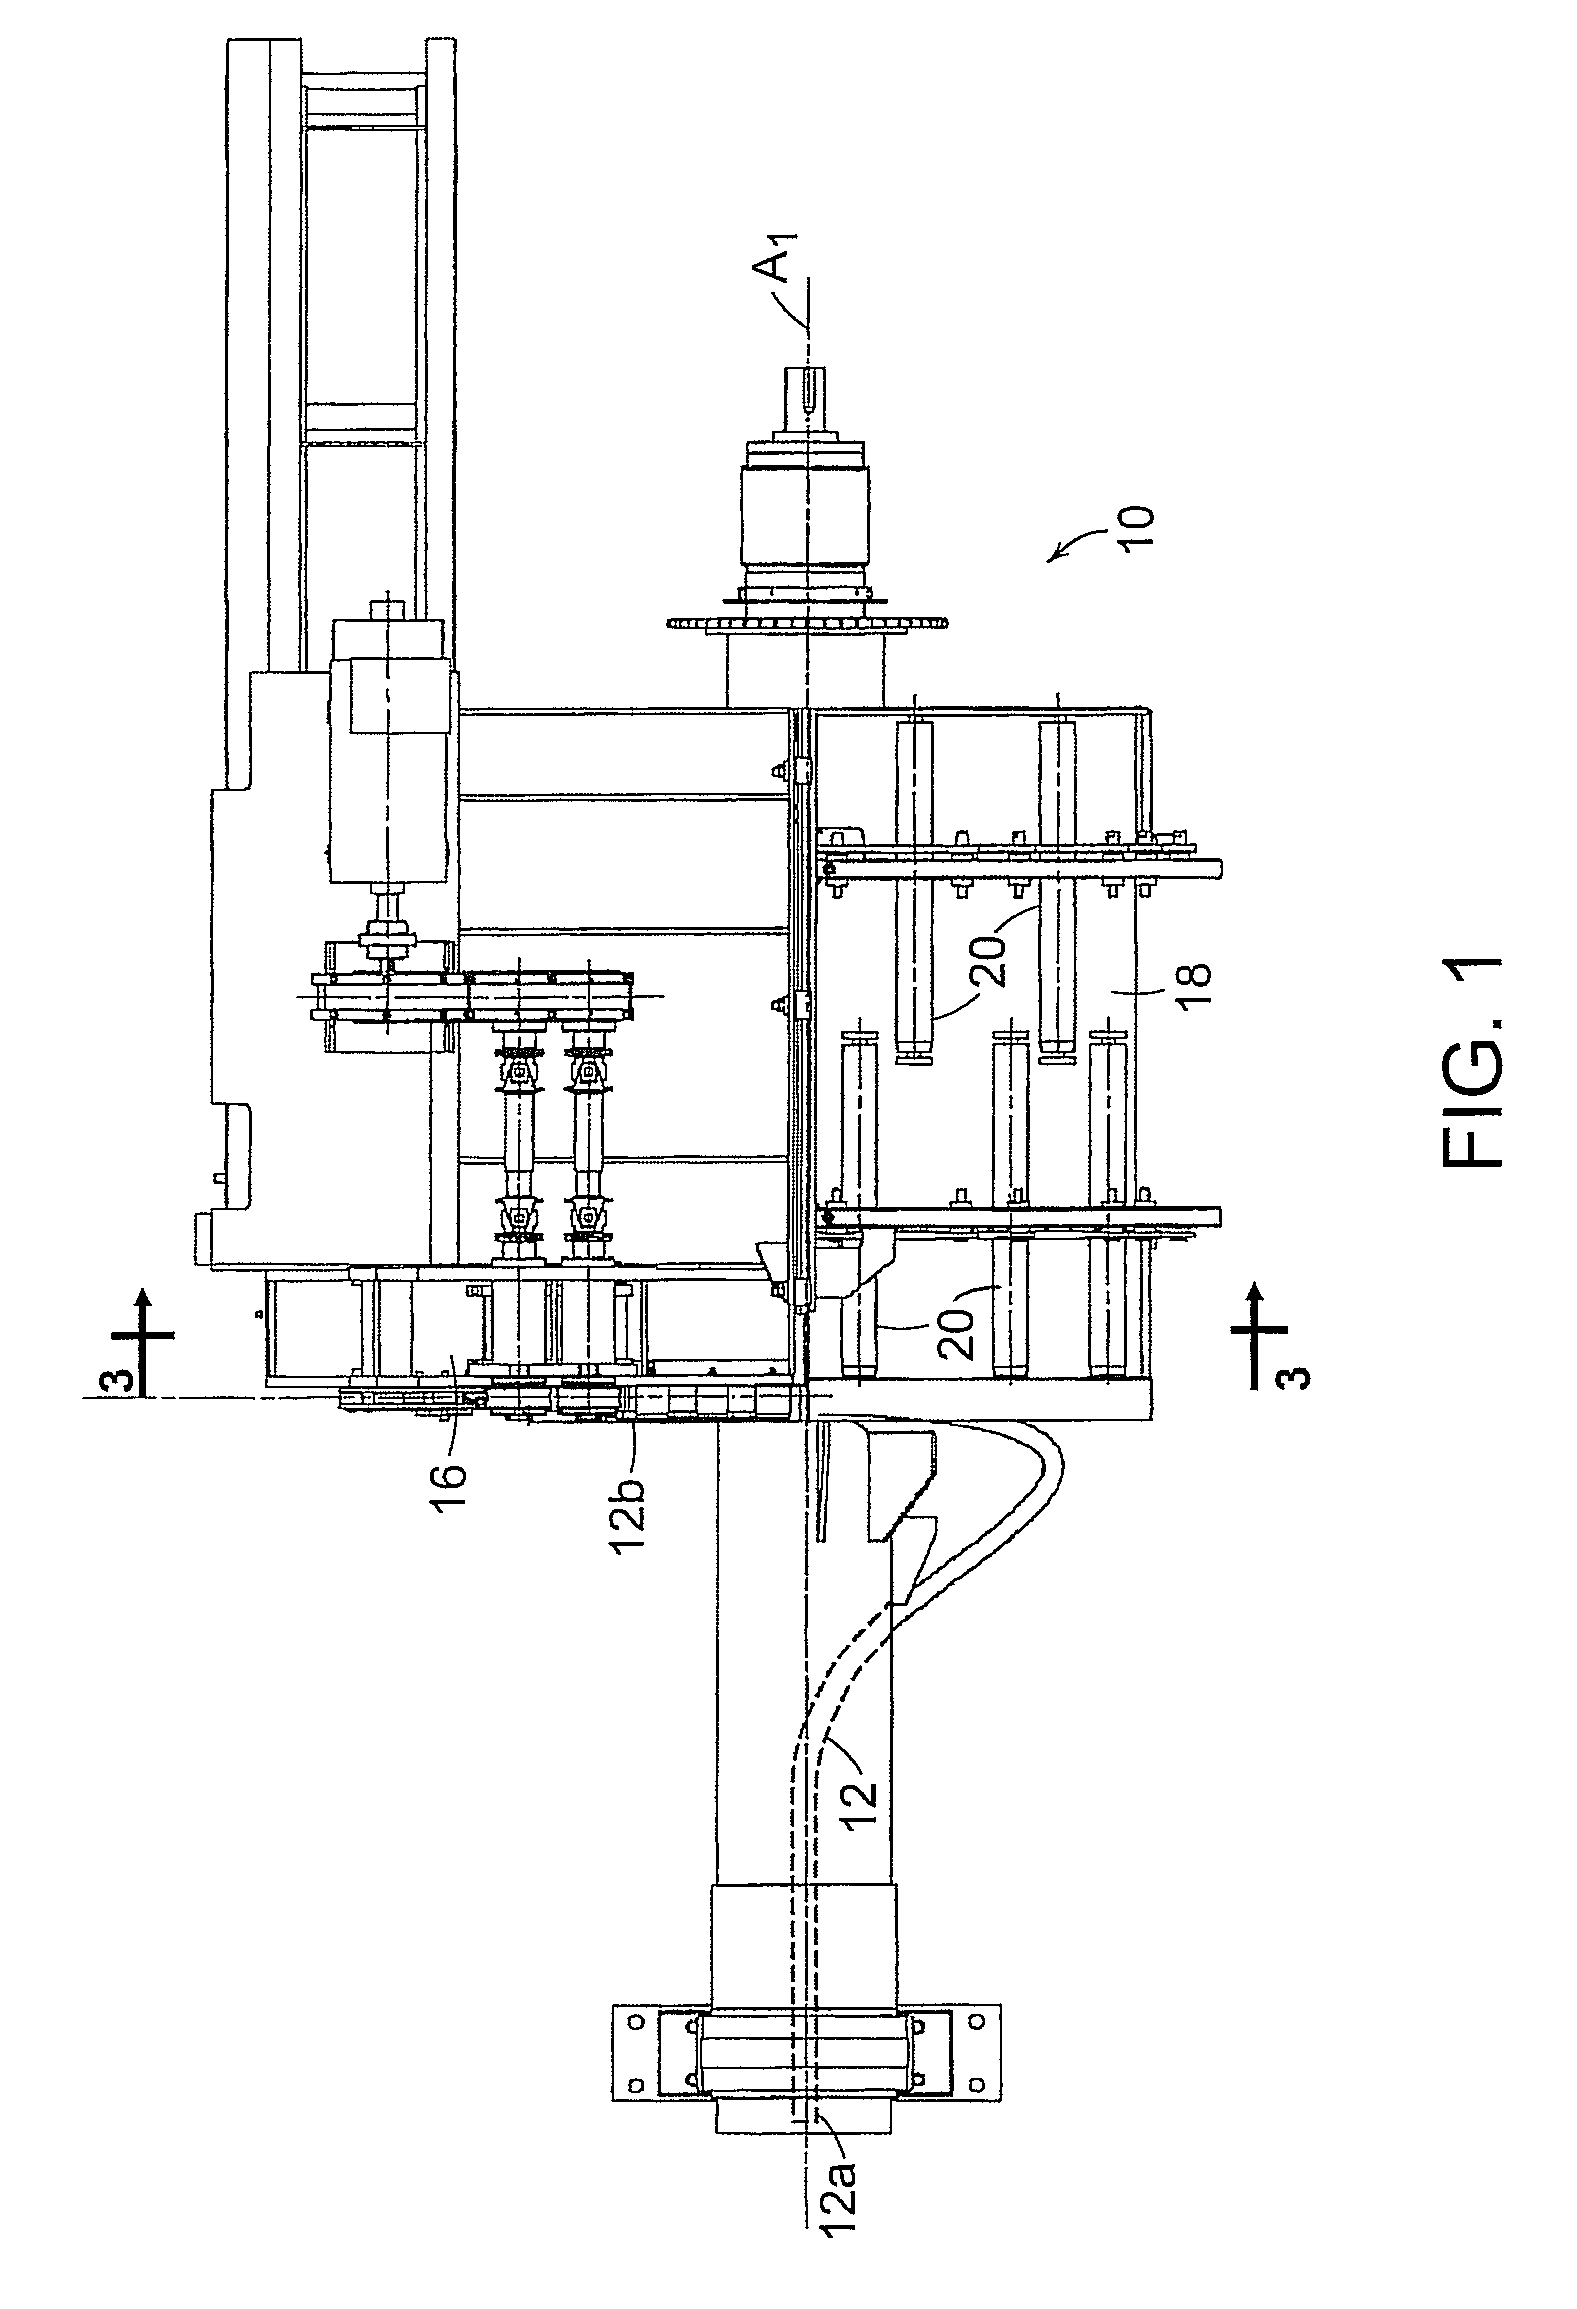 Apparatus for decelerating and temporarily accumulating hot rolled product